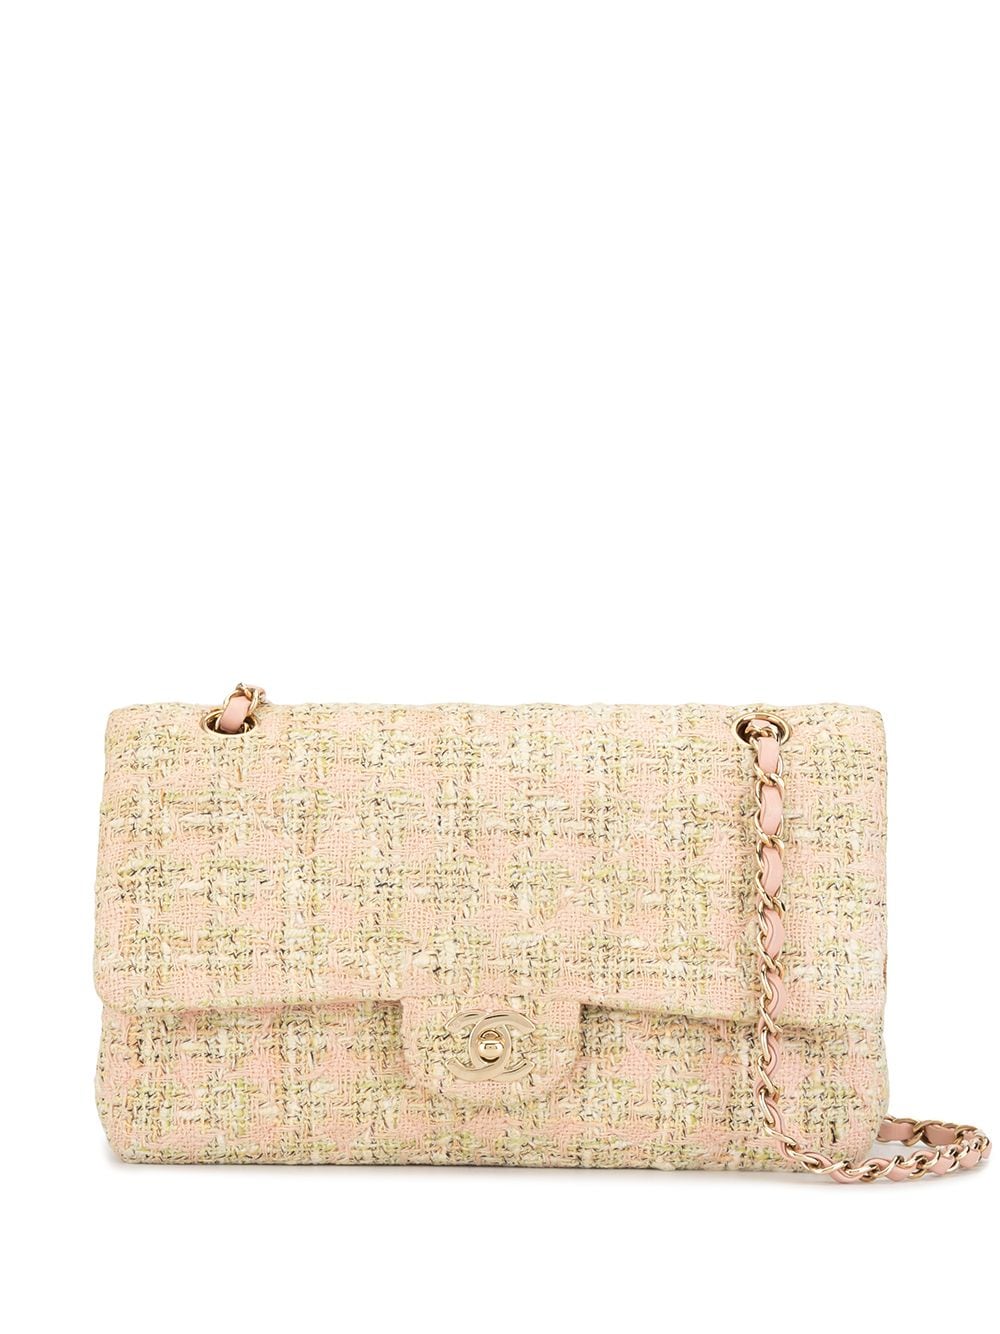 Chanel Small Elegant Chain Flap Bag Pink and Beige Tweed Gold